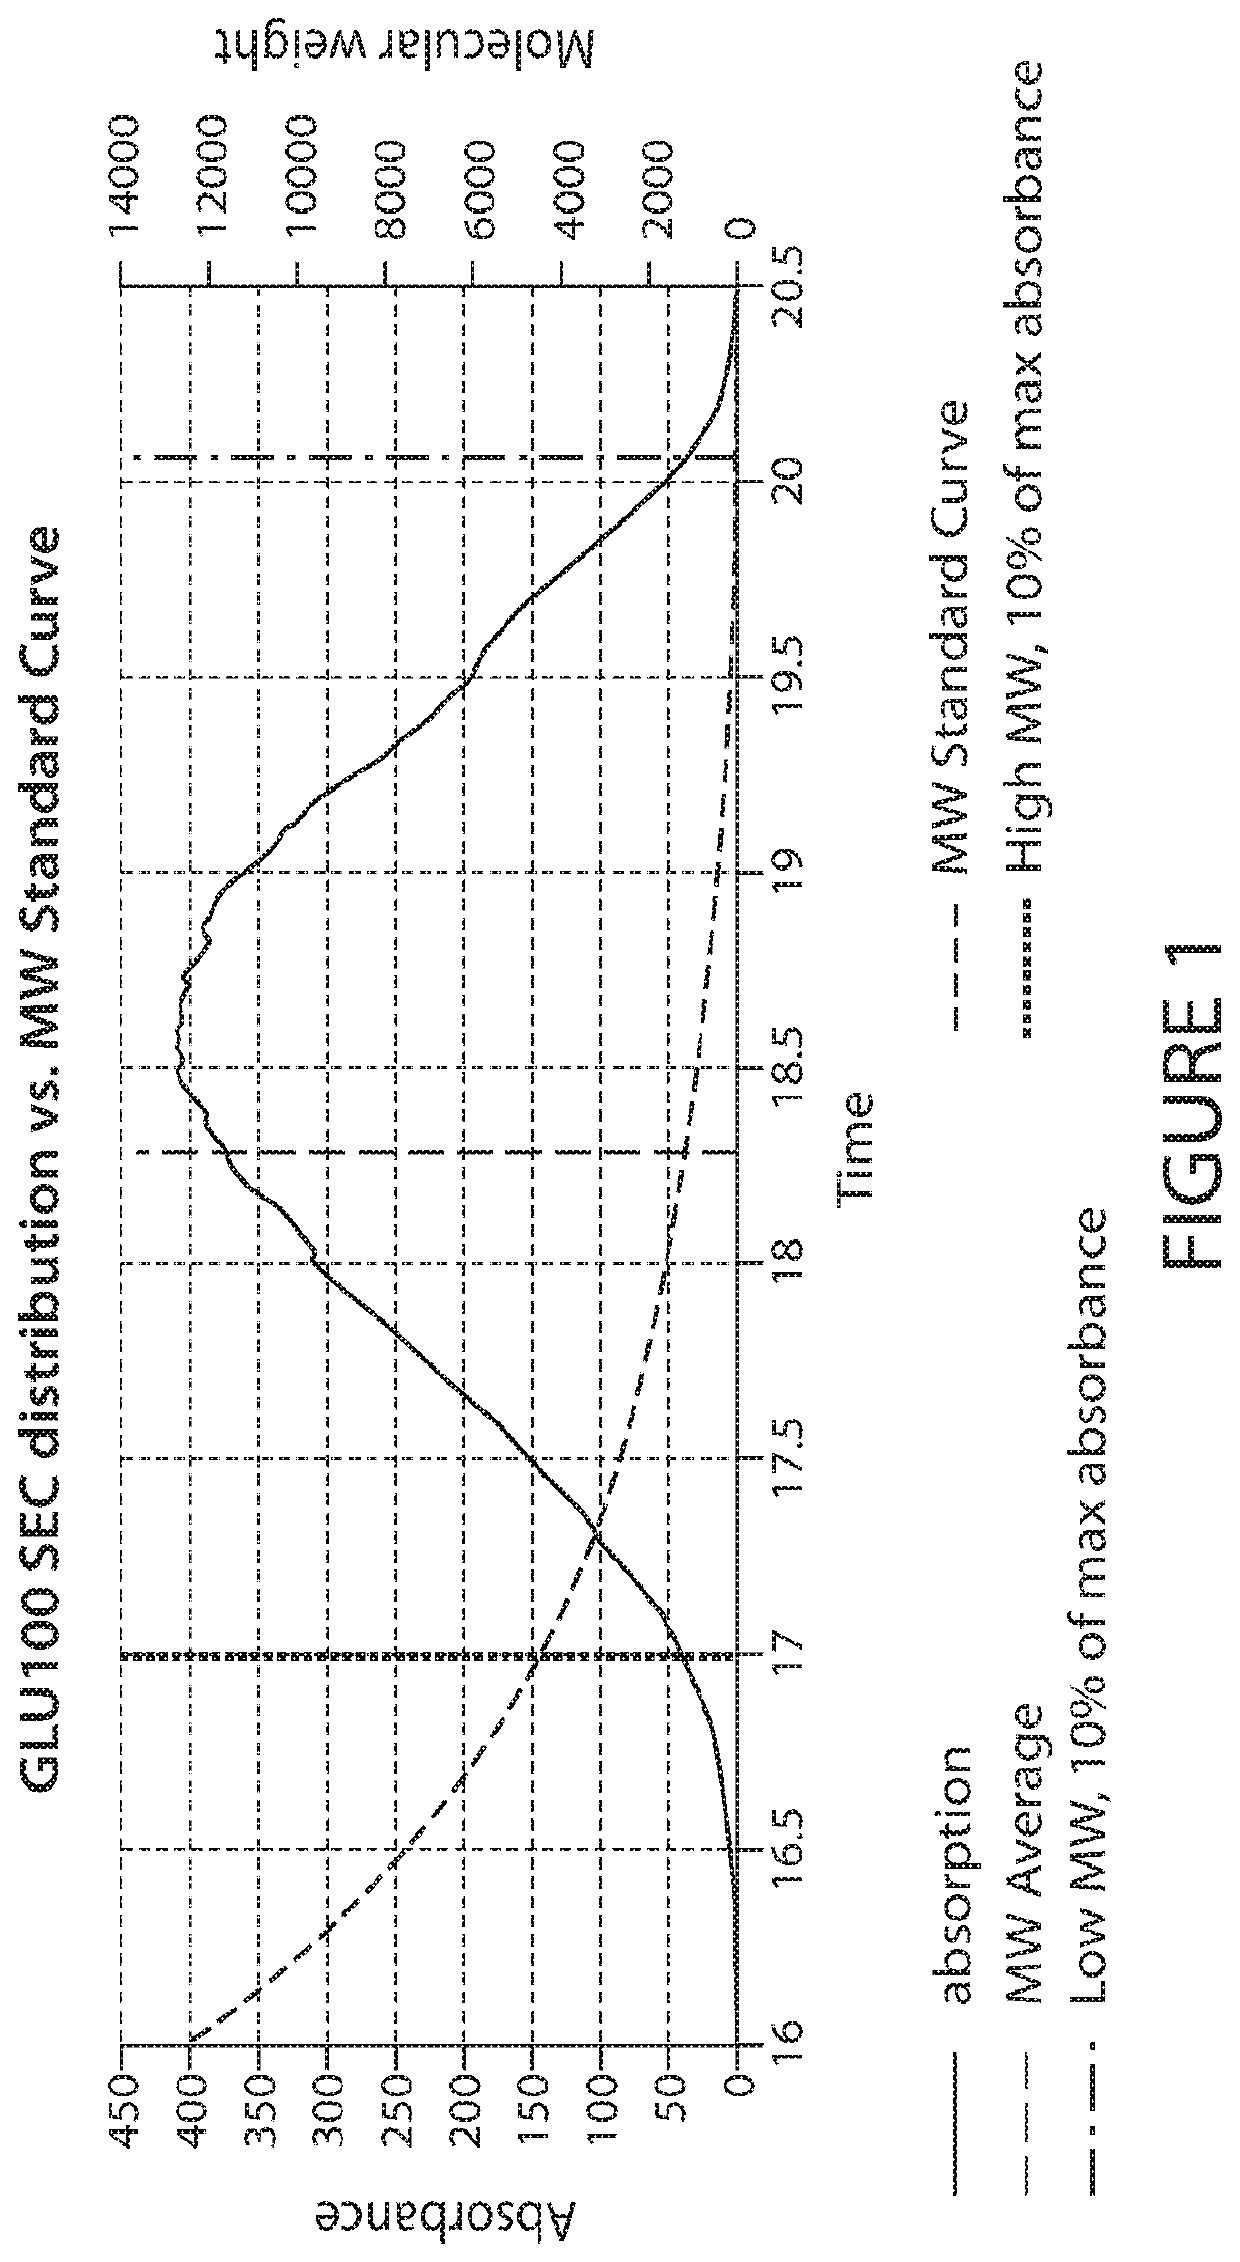 Glycan preparations and methods of use for hyperammonemia